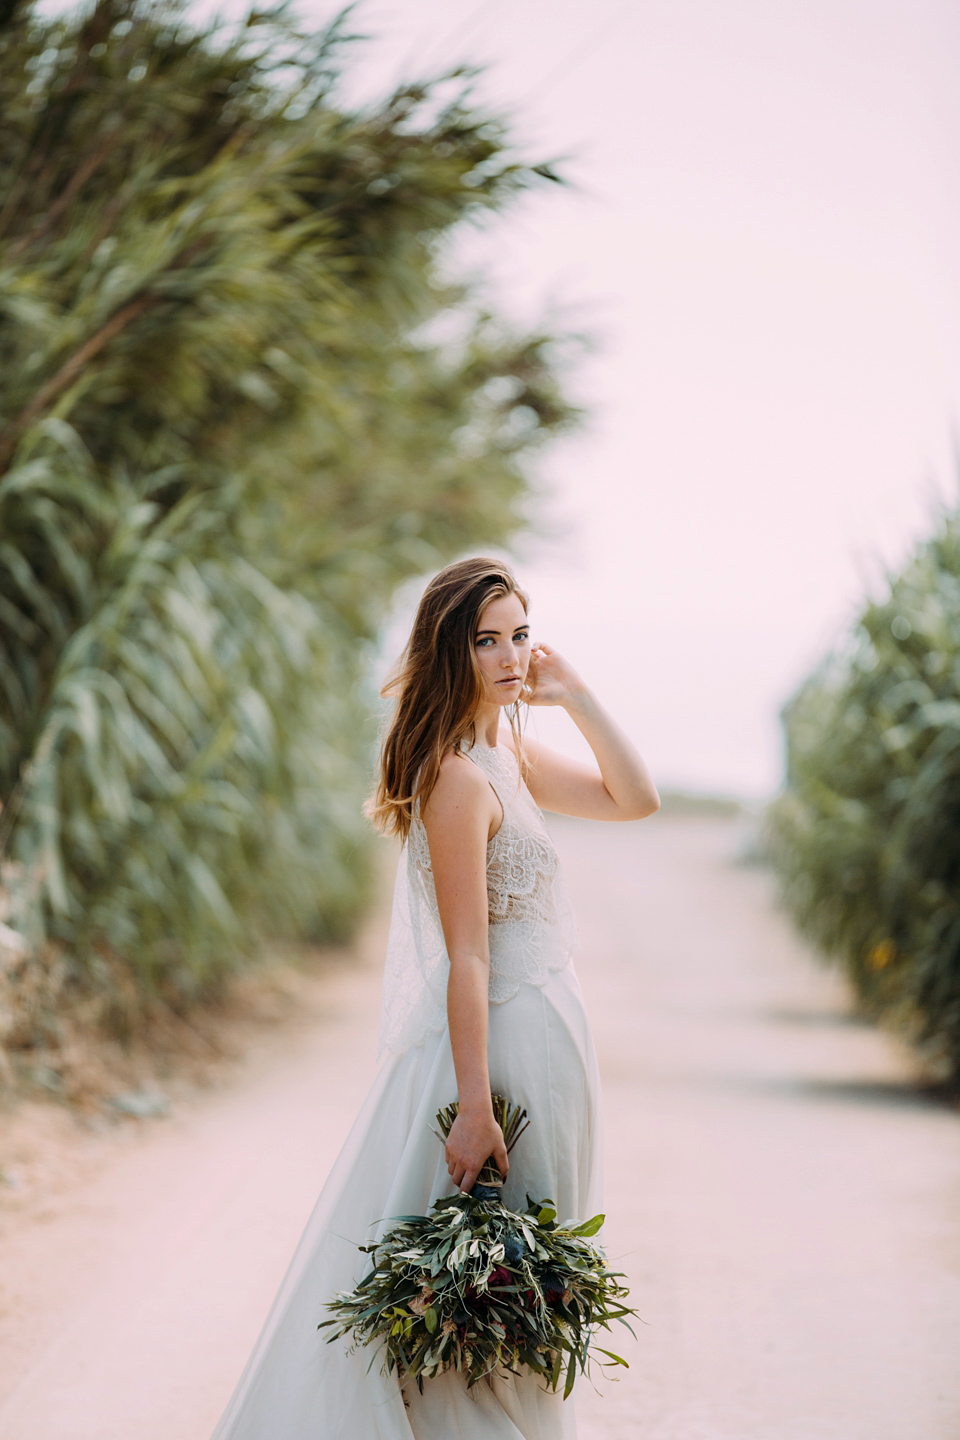 Young love and wanderlust - a wild and romantic Spanish Elopement shoot.